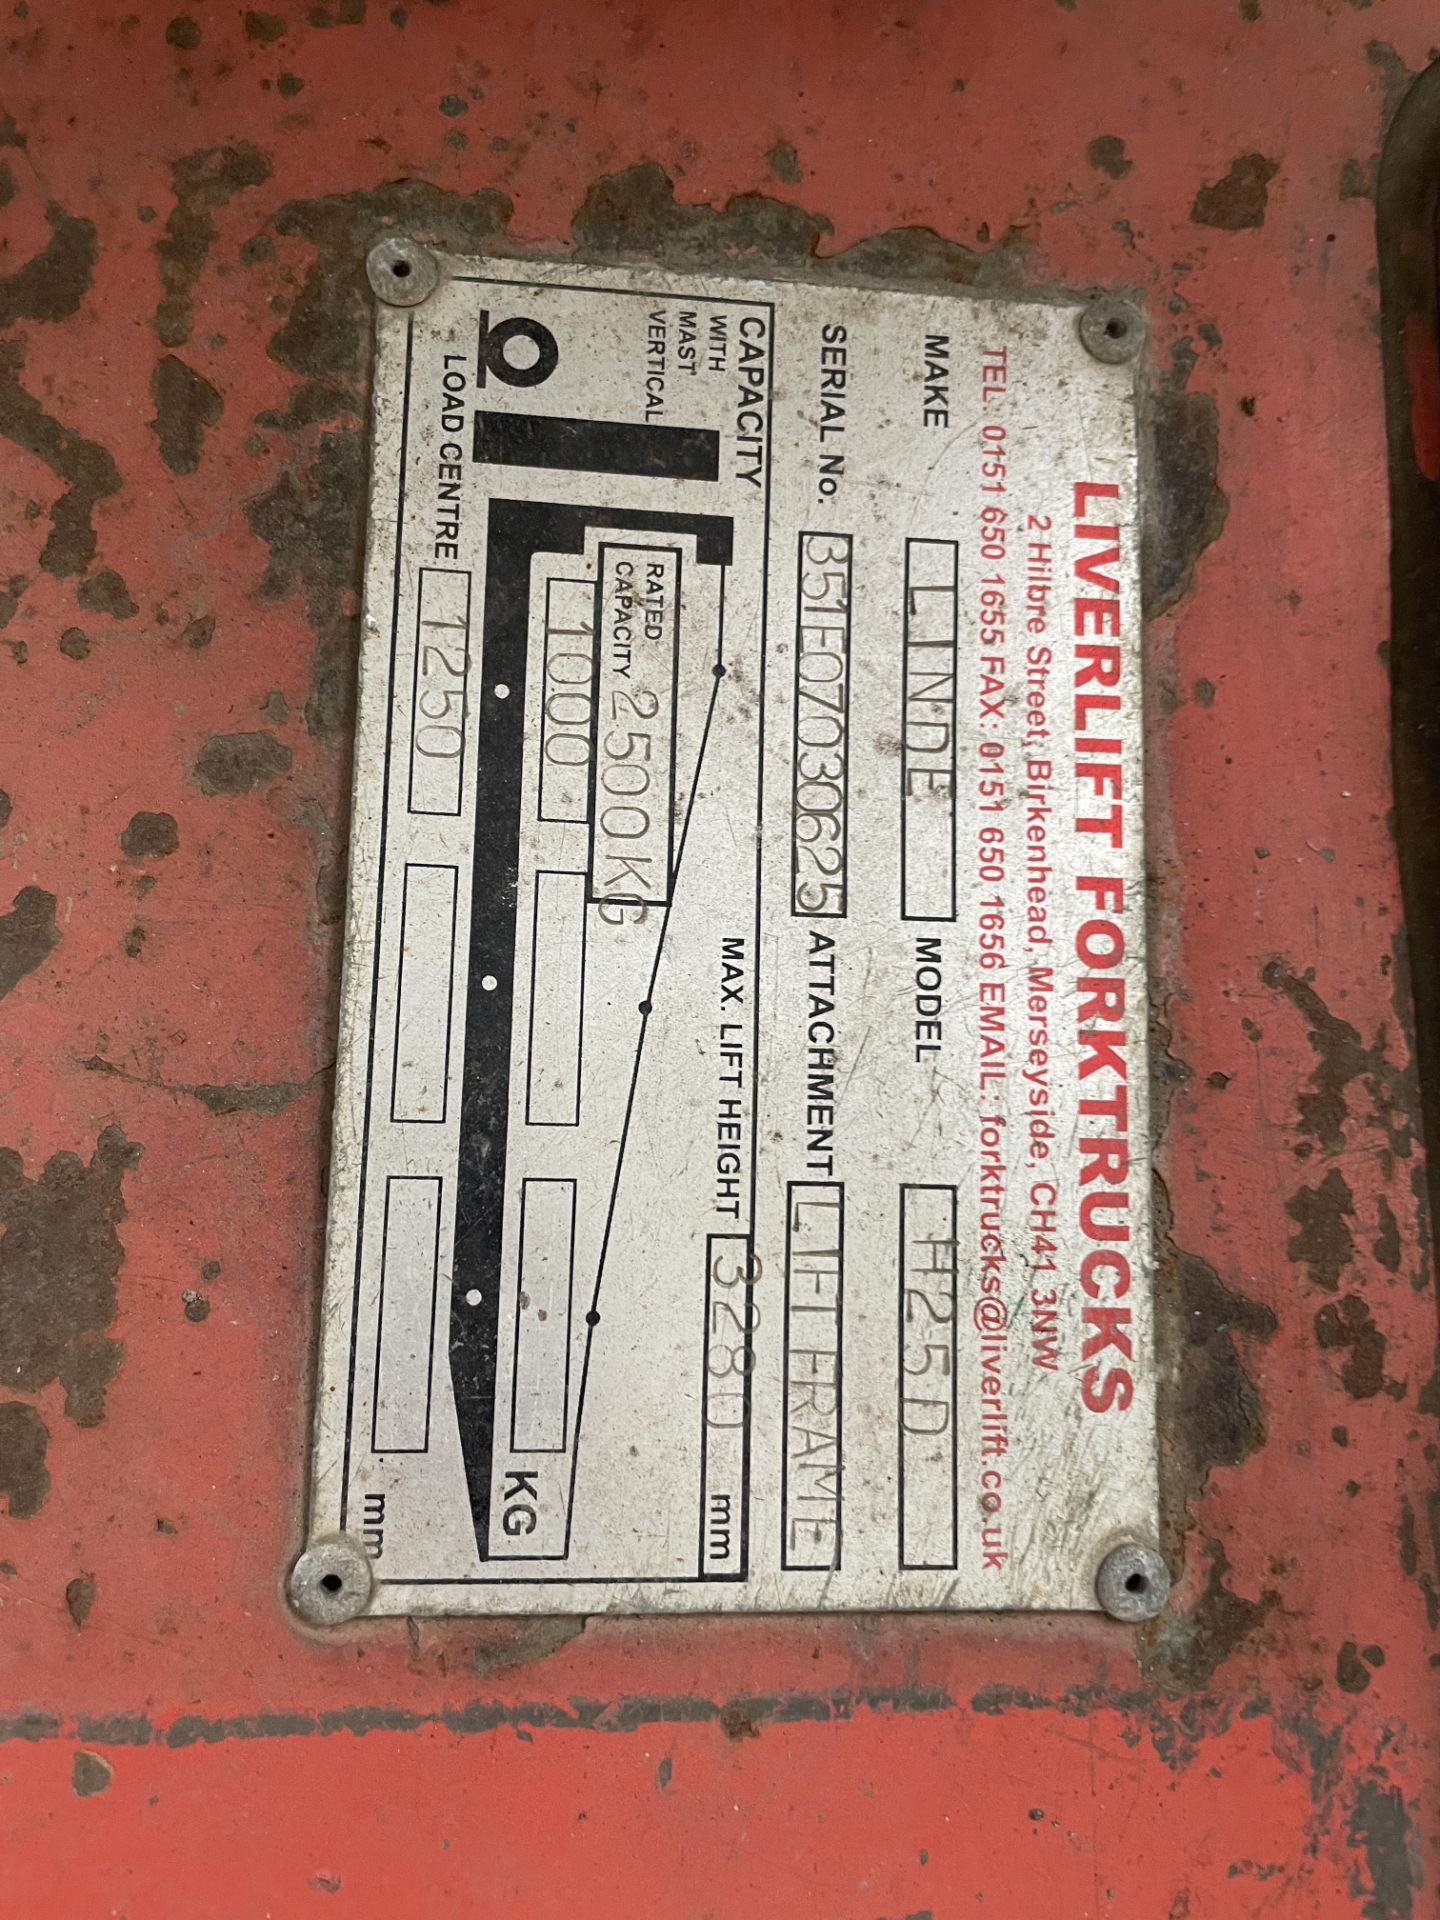 Linde H25D 2500kg cap. DIESEL FORK LIFT TRUCK, serial no. 351E07030625, indicated hours 12589 (at - Image 7 of 7